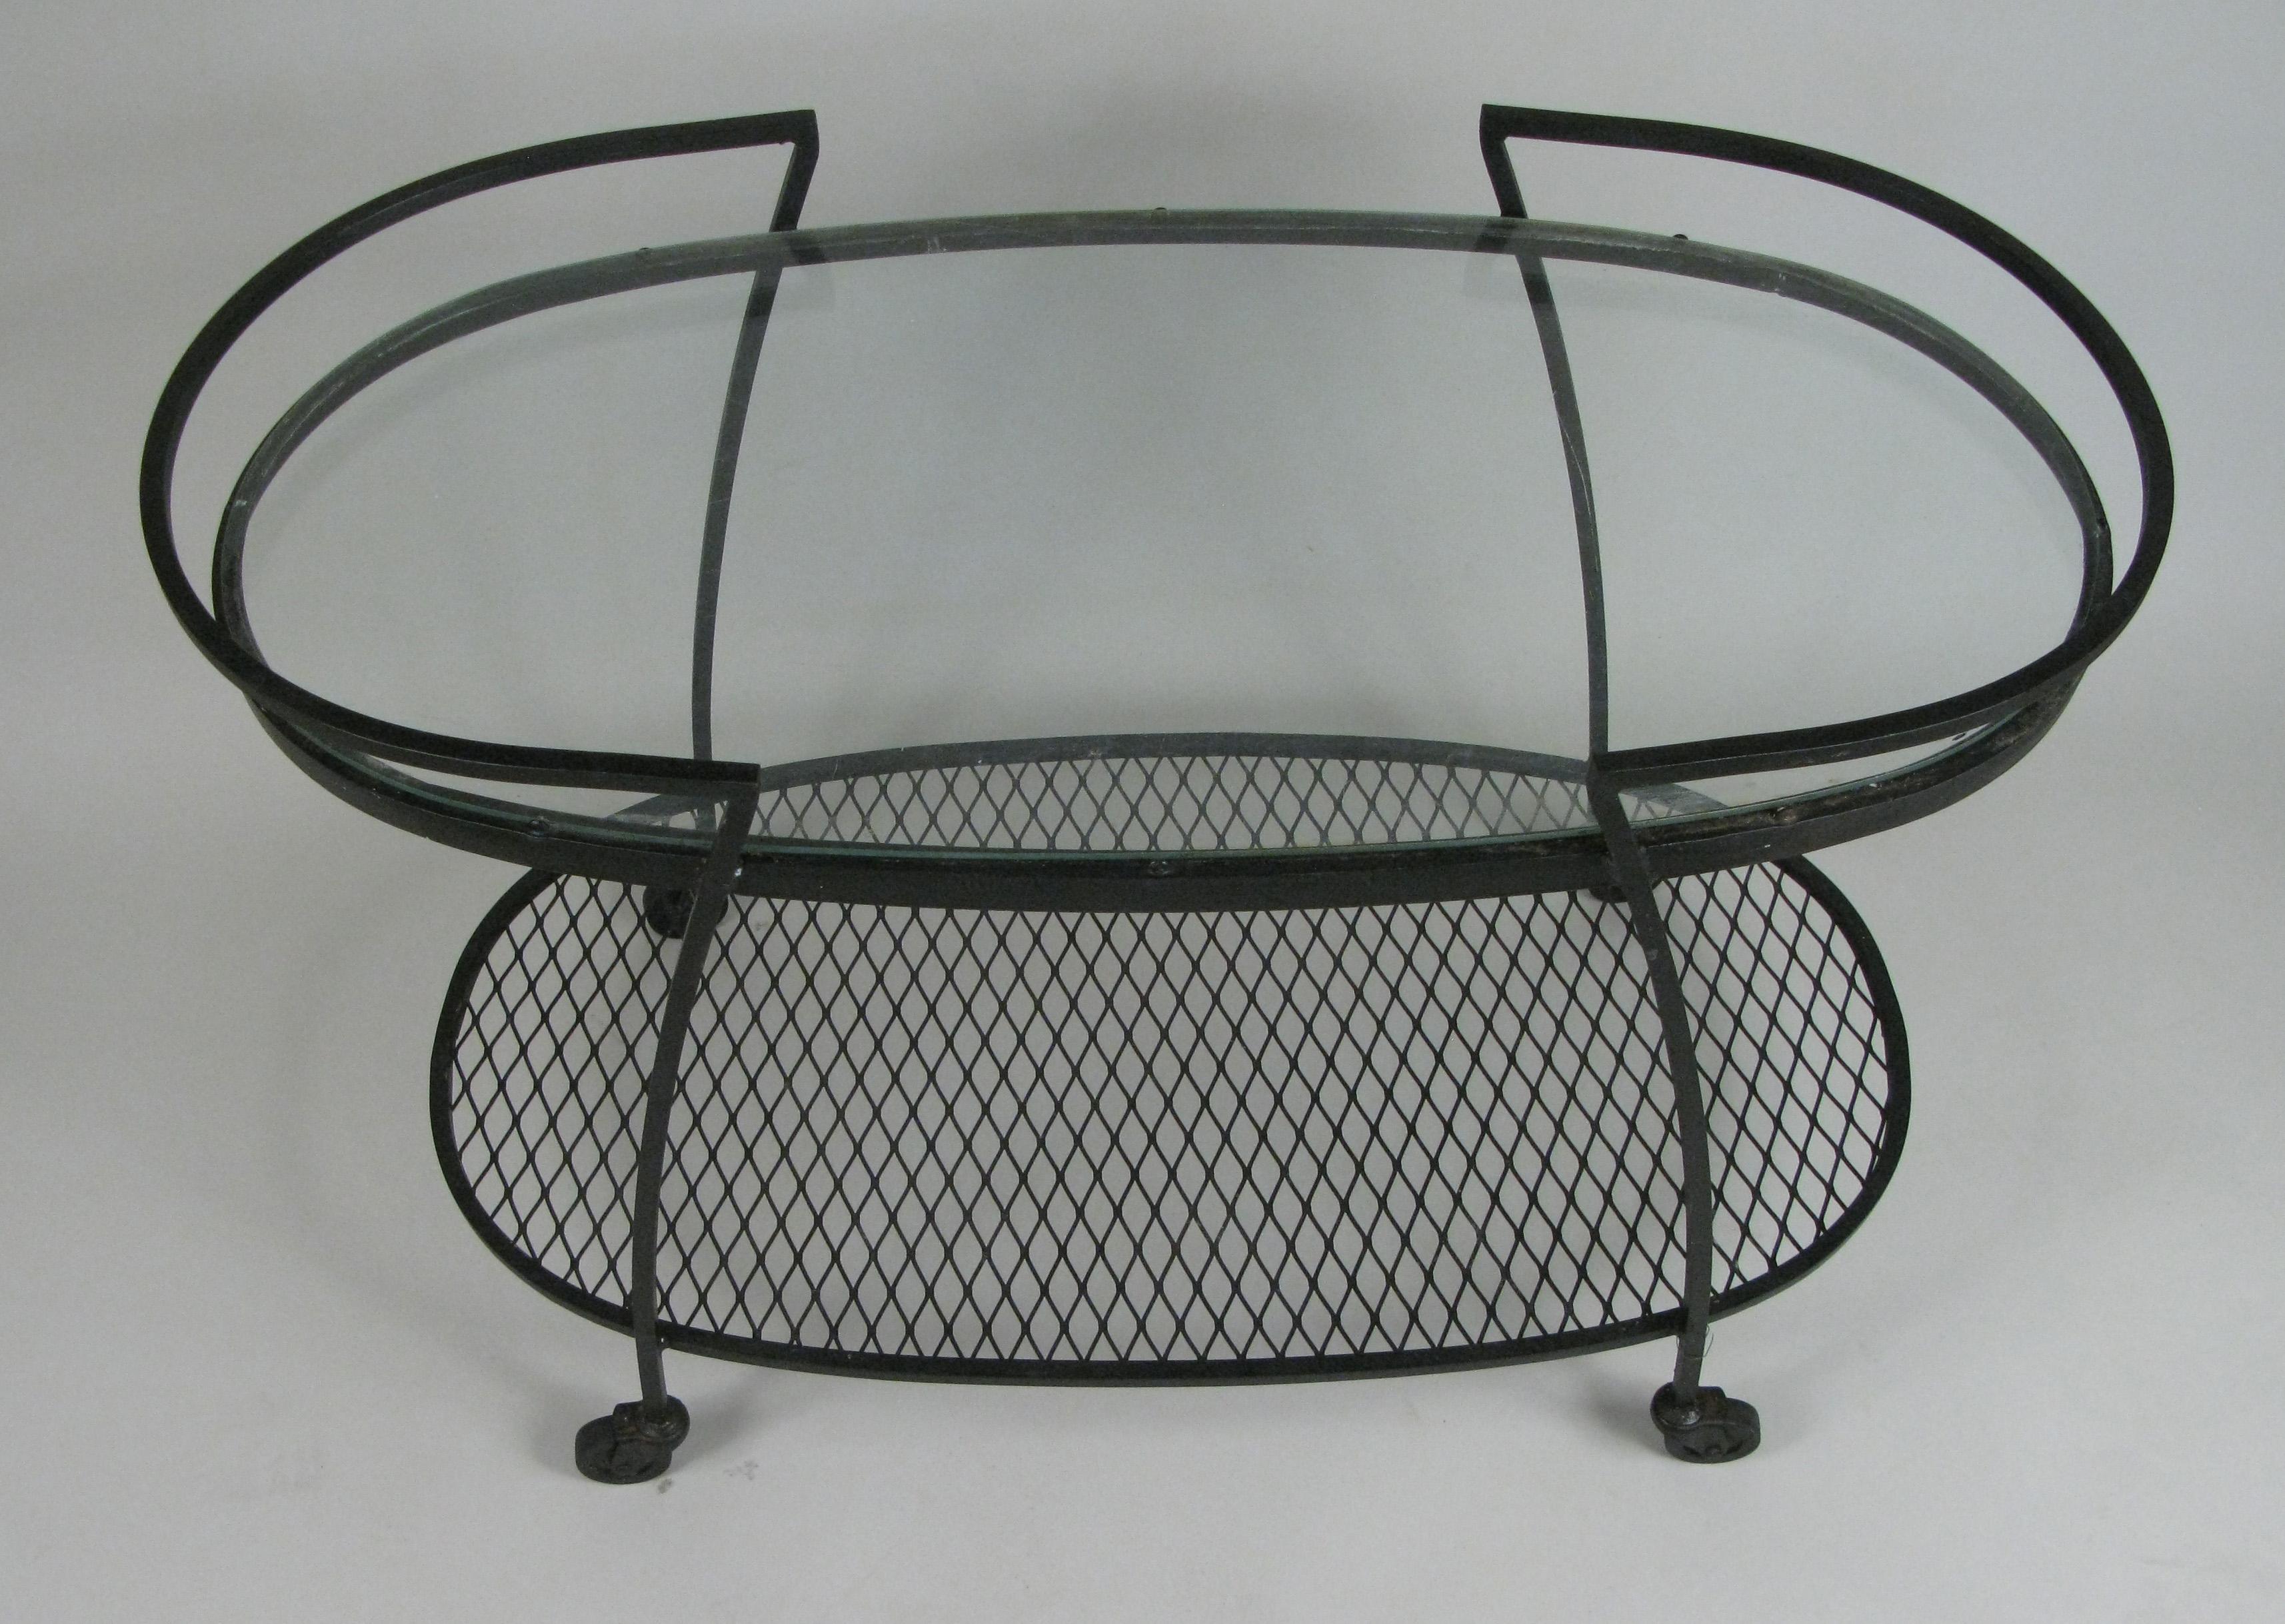 One of the best of Woodard's series of wrought iron rolling bar carts from the 1950s, this oval design from the Pinecrest collection has a low steel mesh shelf, and a large glass oval top. The handles curve around the ends and provide a rim to keep